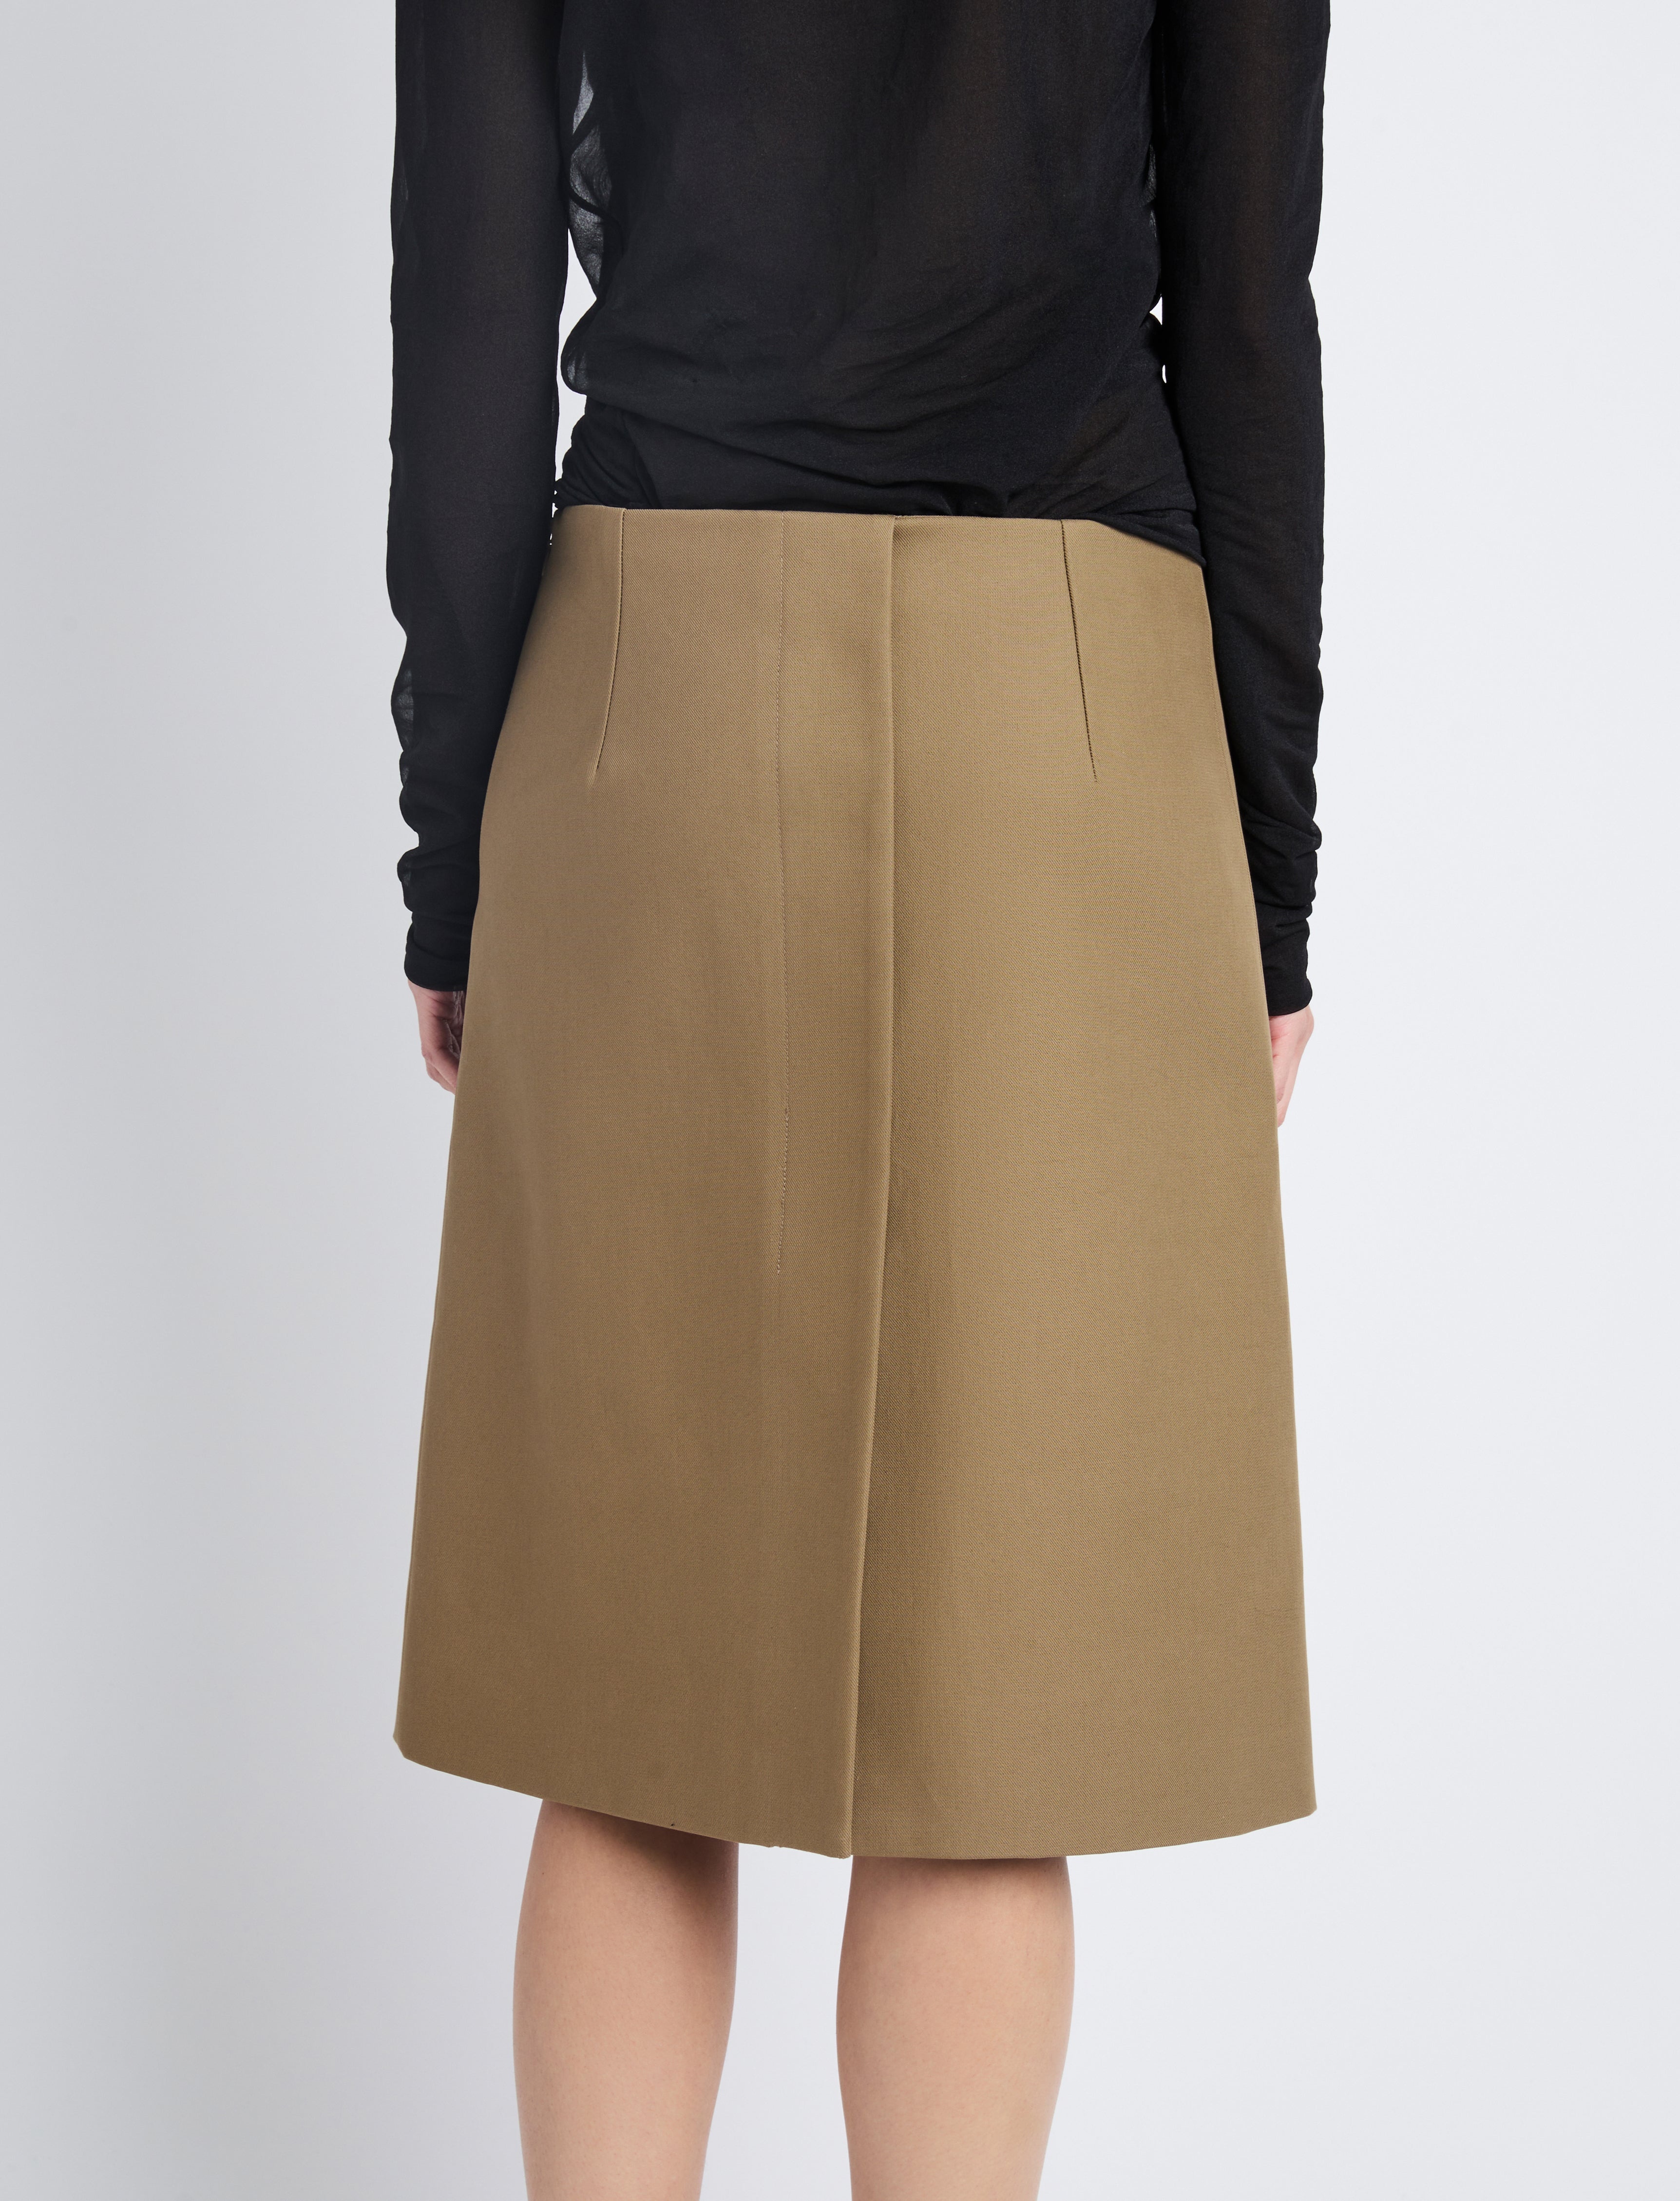 Adele Skirt in Eco Cotton Twill - 5